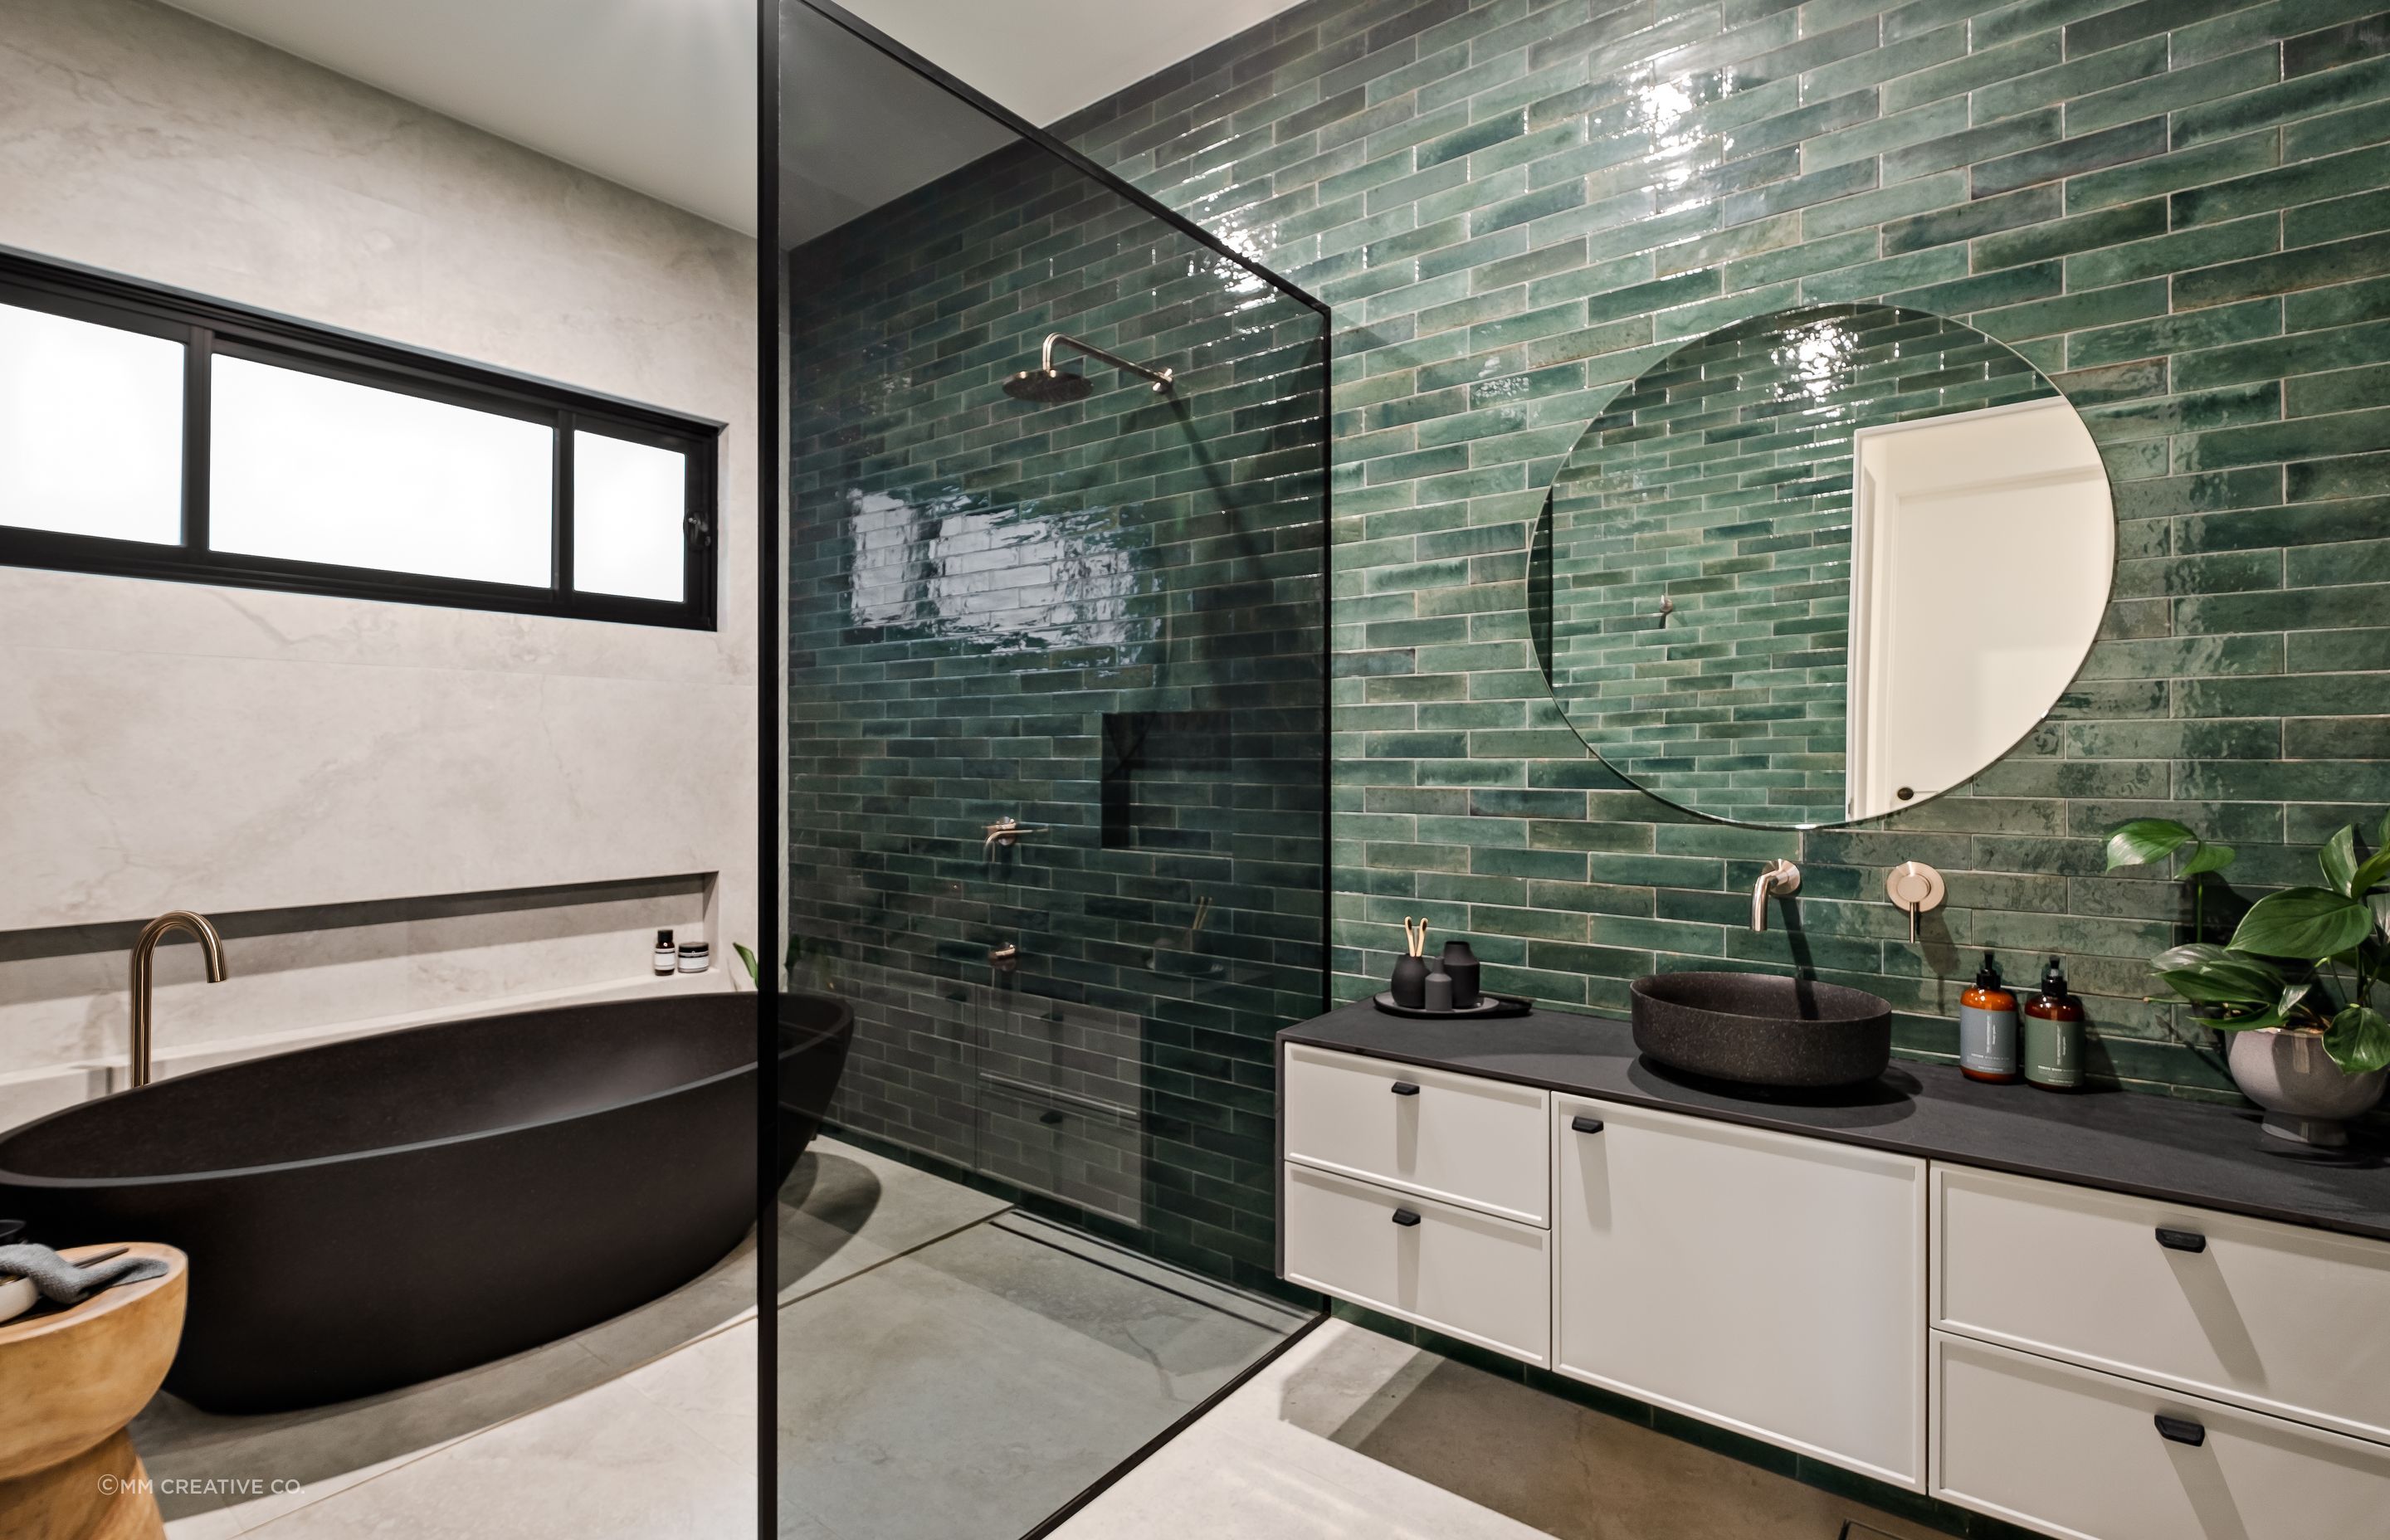 The family bathroom shared by the two younger children also features a green-tiled feature wall.